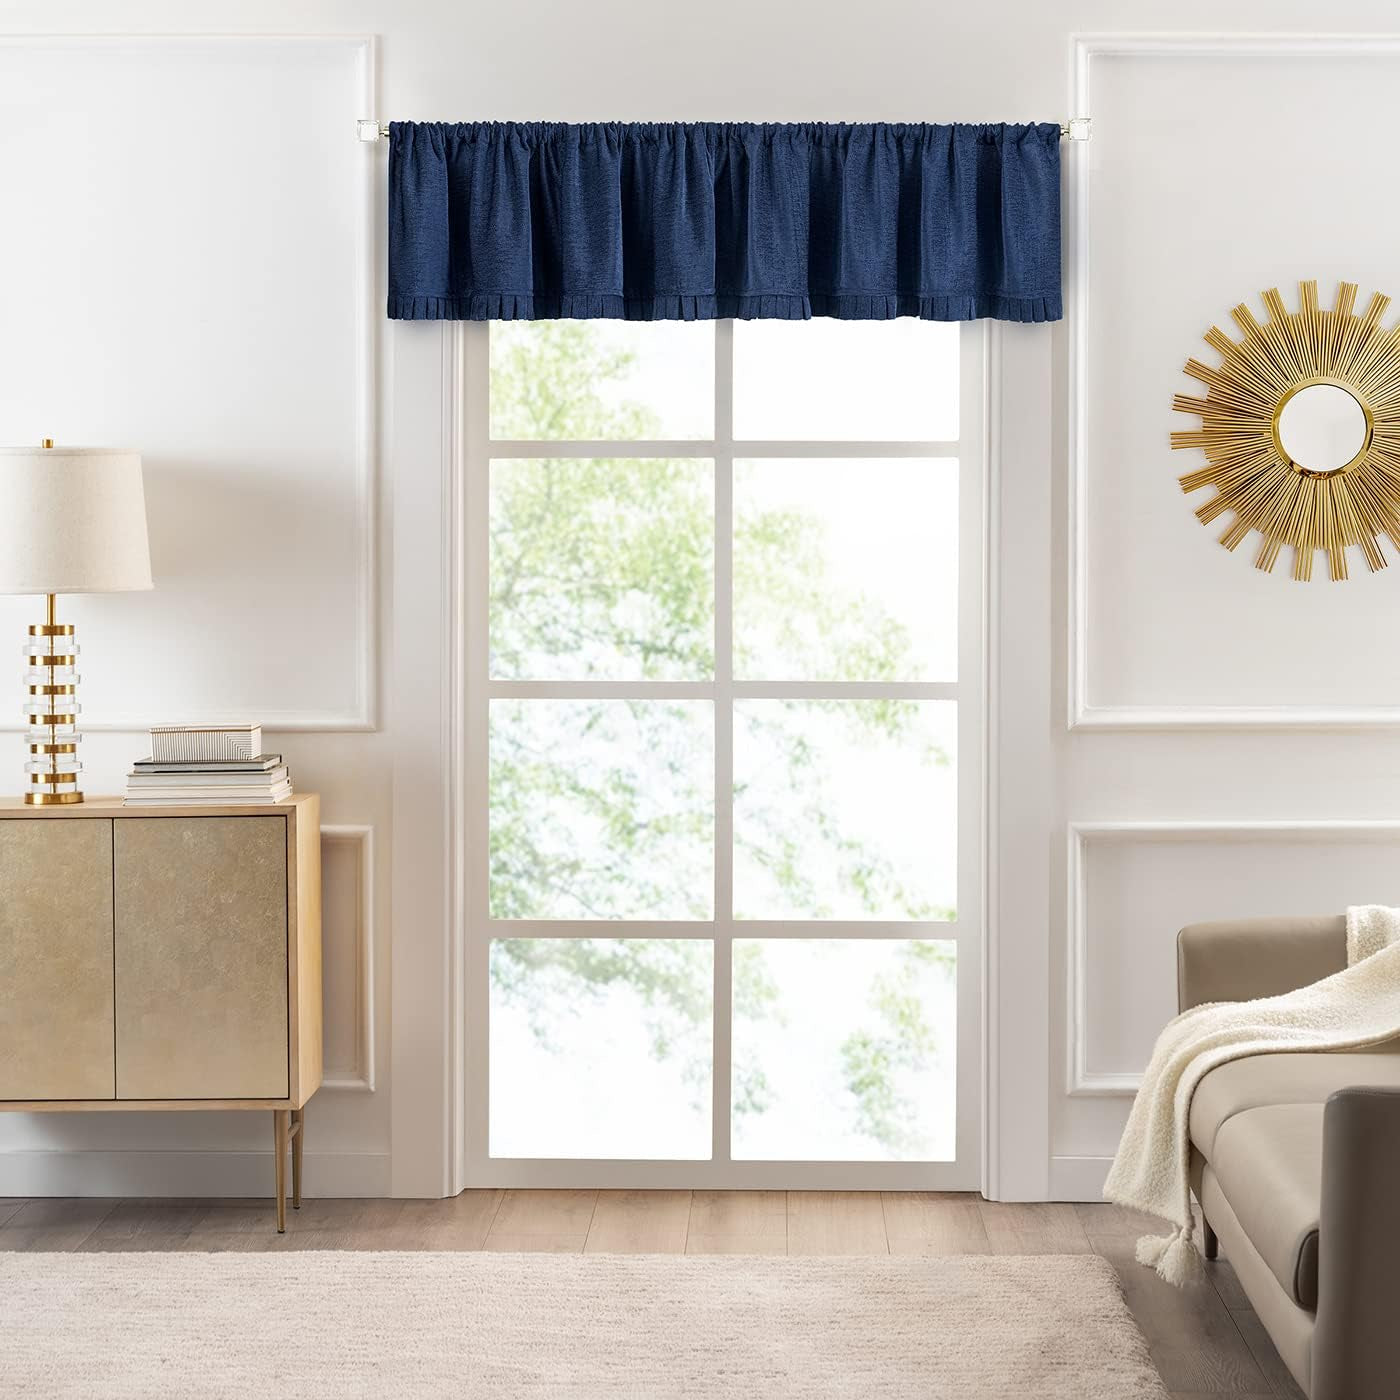 Woven Trends Semi Sheer Pinch Pleated Curtains, Solid Farmhouse and Modern Rustic Curtains, Chenille Cloth with Box Pleated Edges for Living Room, Bedroom, 52" W X 14" L, Navy Blue  Woven Trends   